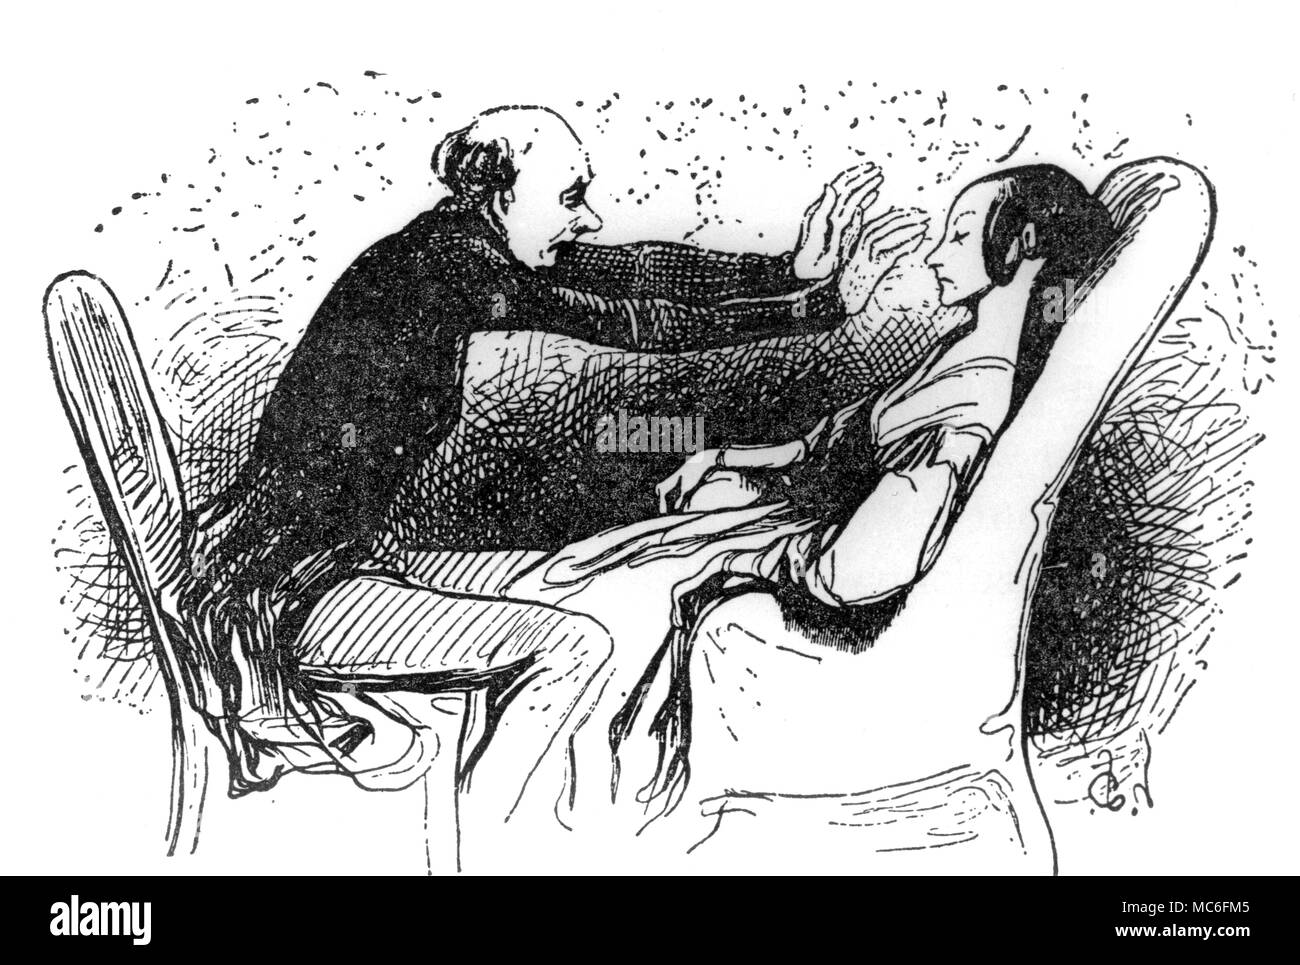 Hypnotist putting young woman to sleep - drawing by Petite, after the lithograph by Daumier. Stock Photo